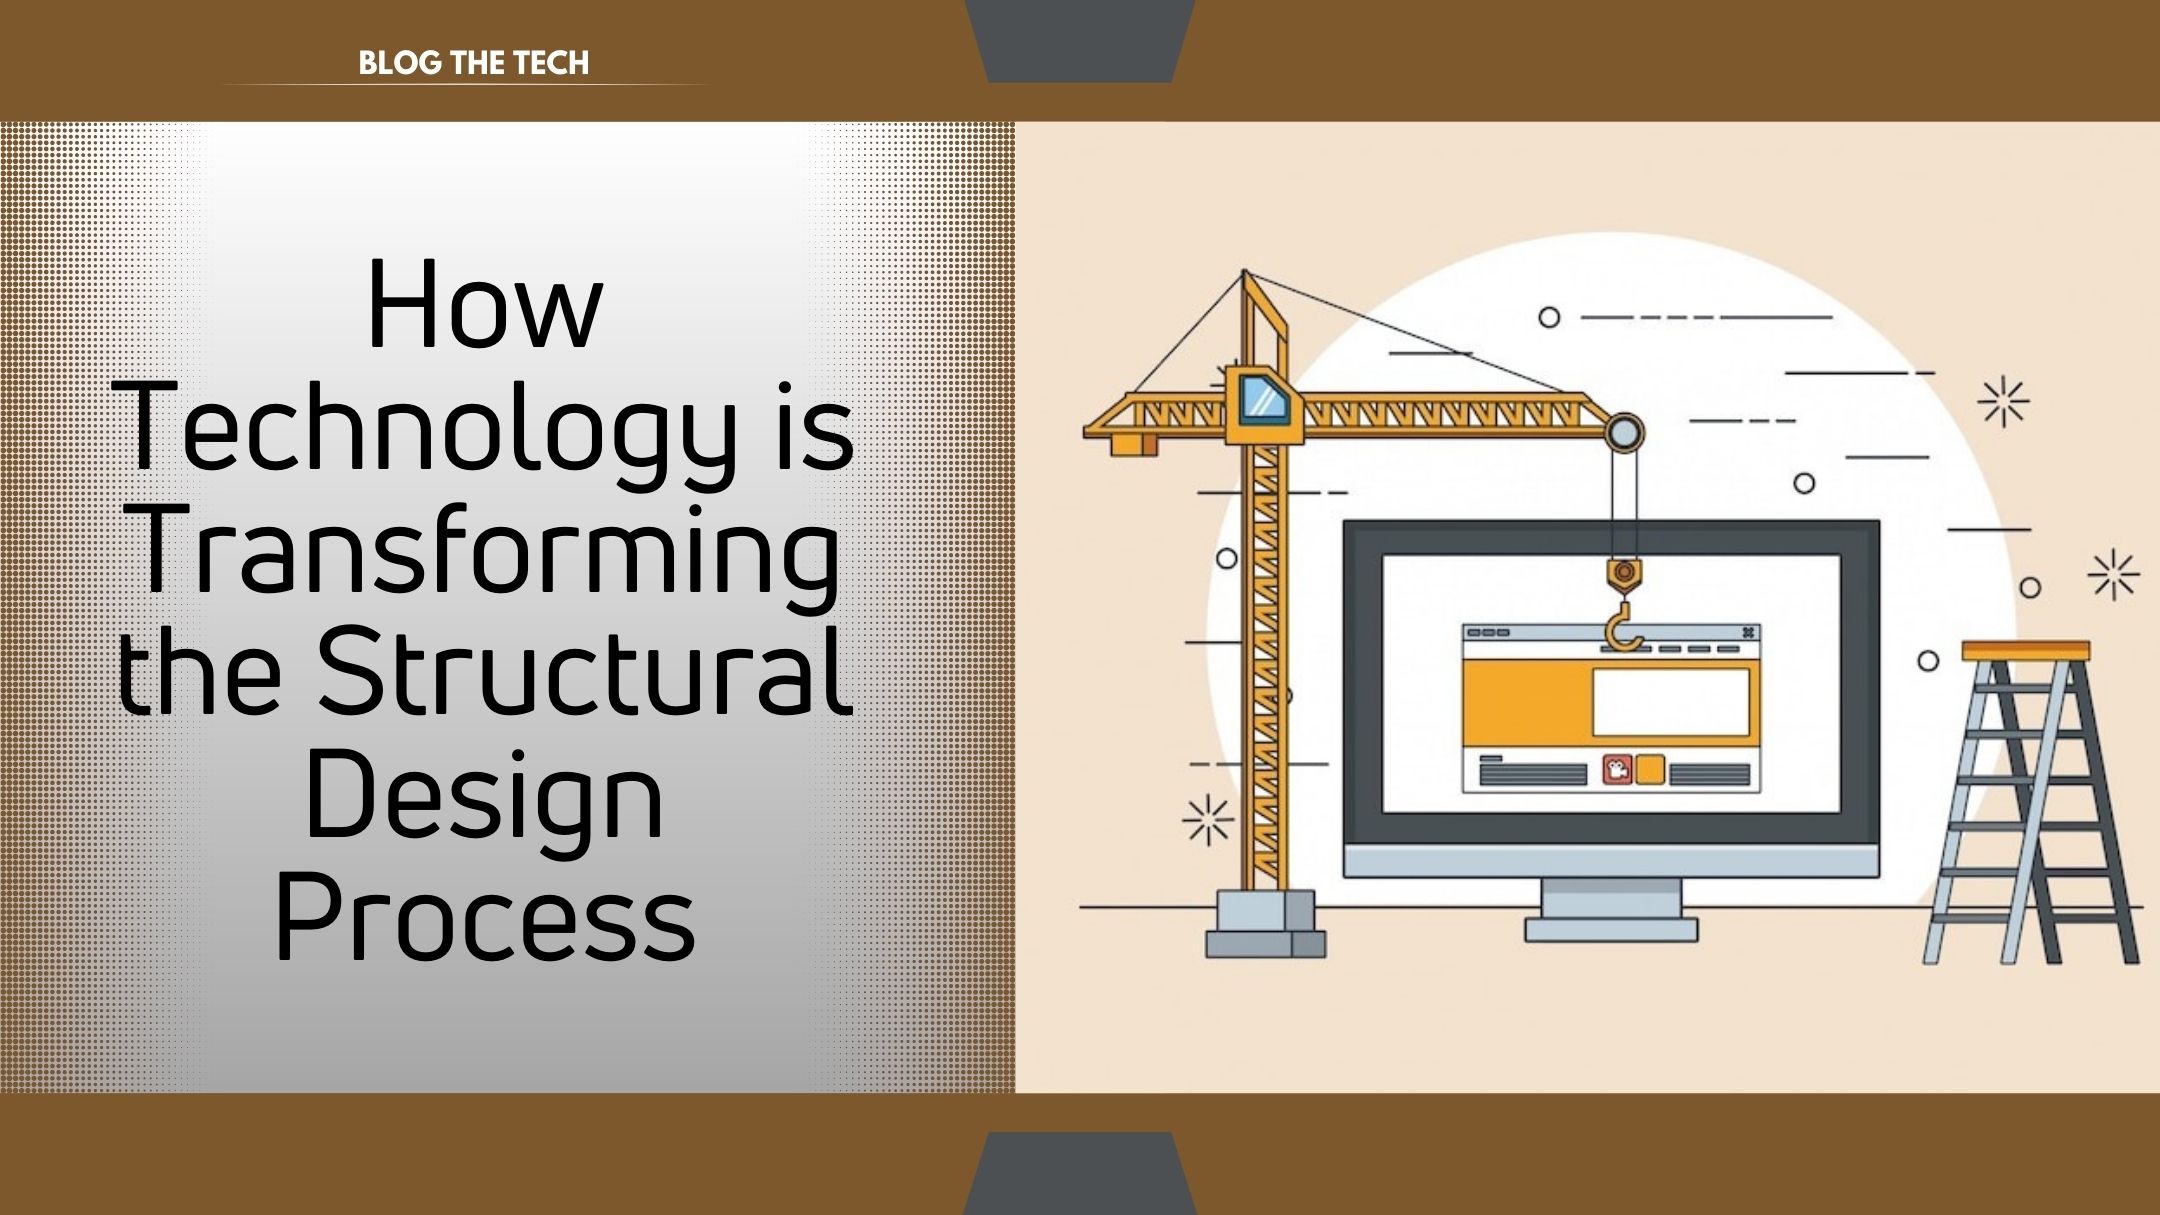 The Structural Design Process: A Technological Transformation